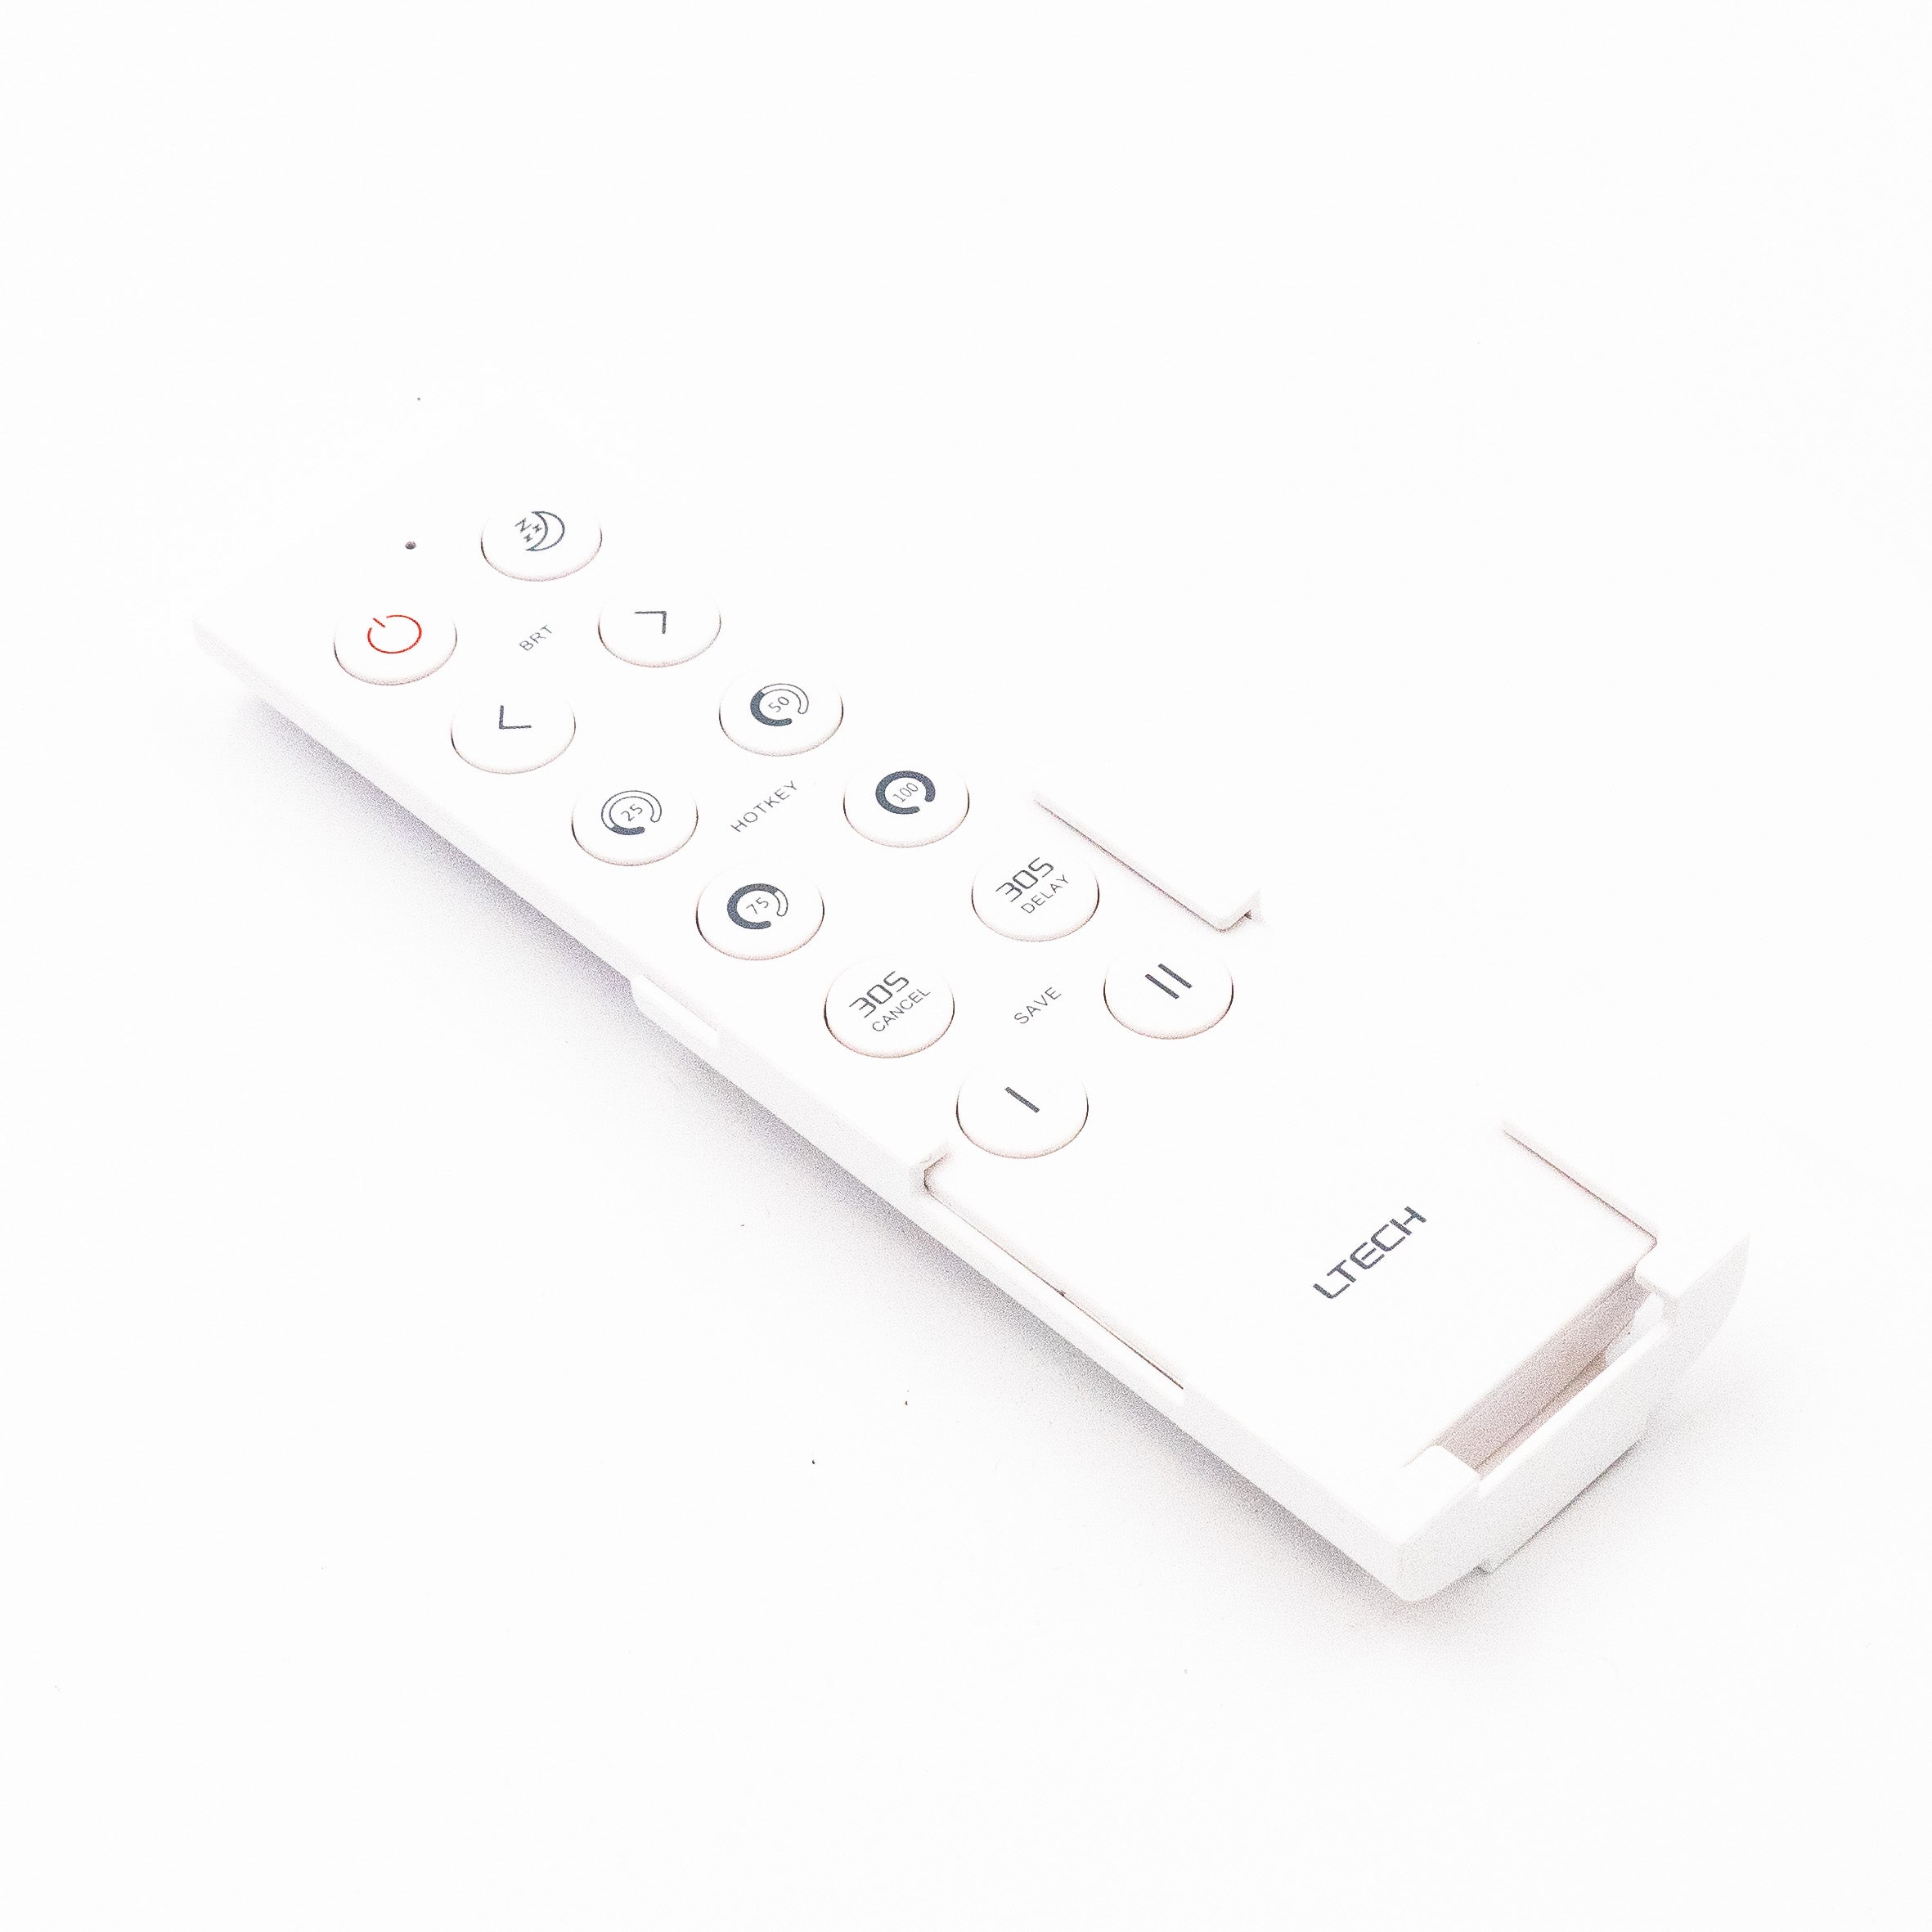 Ltech F1 2.4GHz RF Dimming remote control